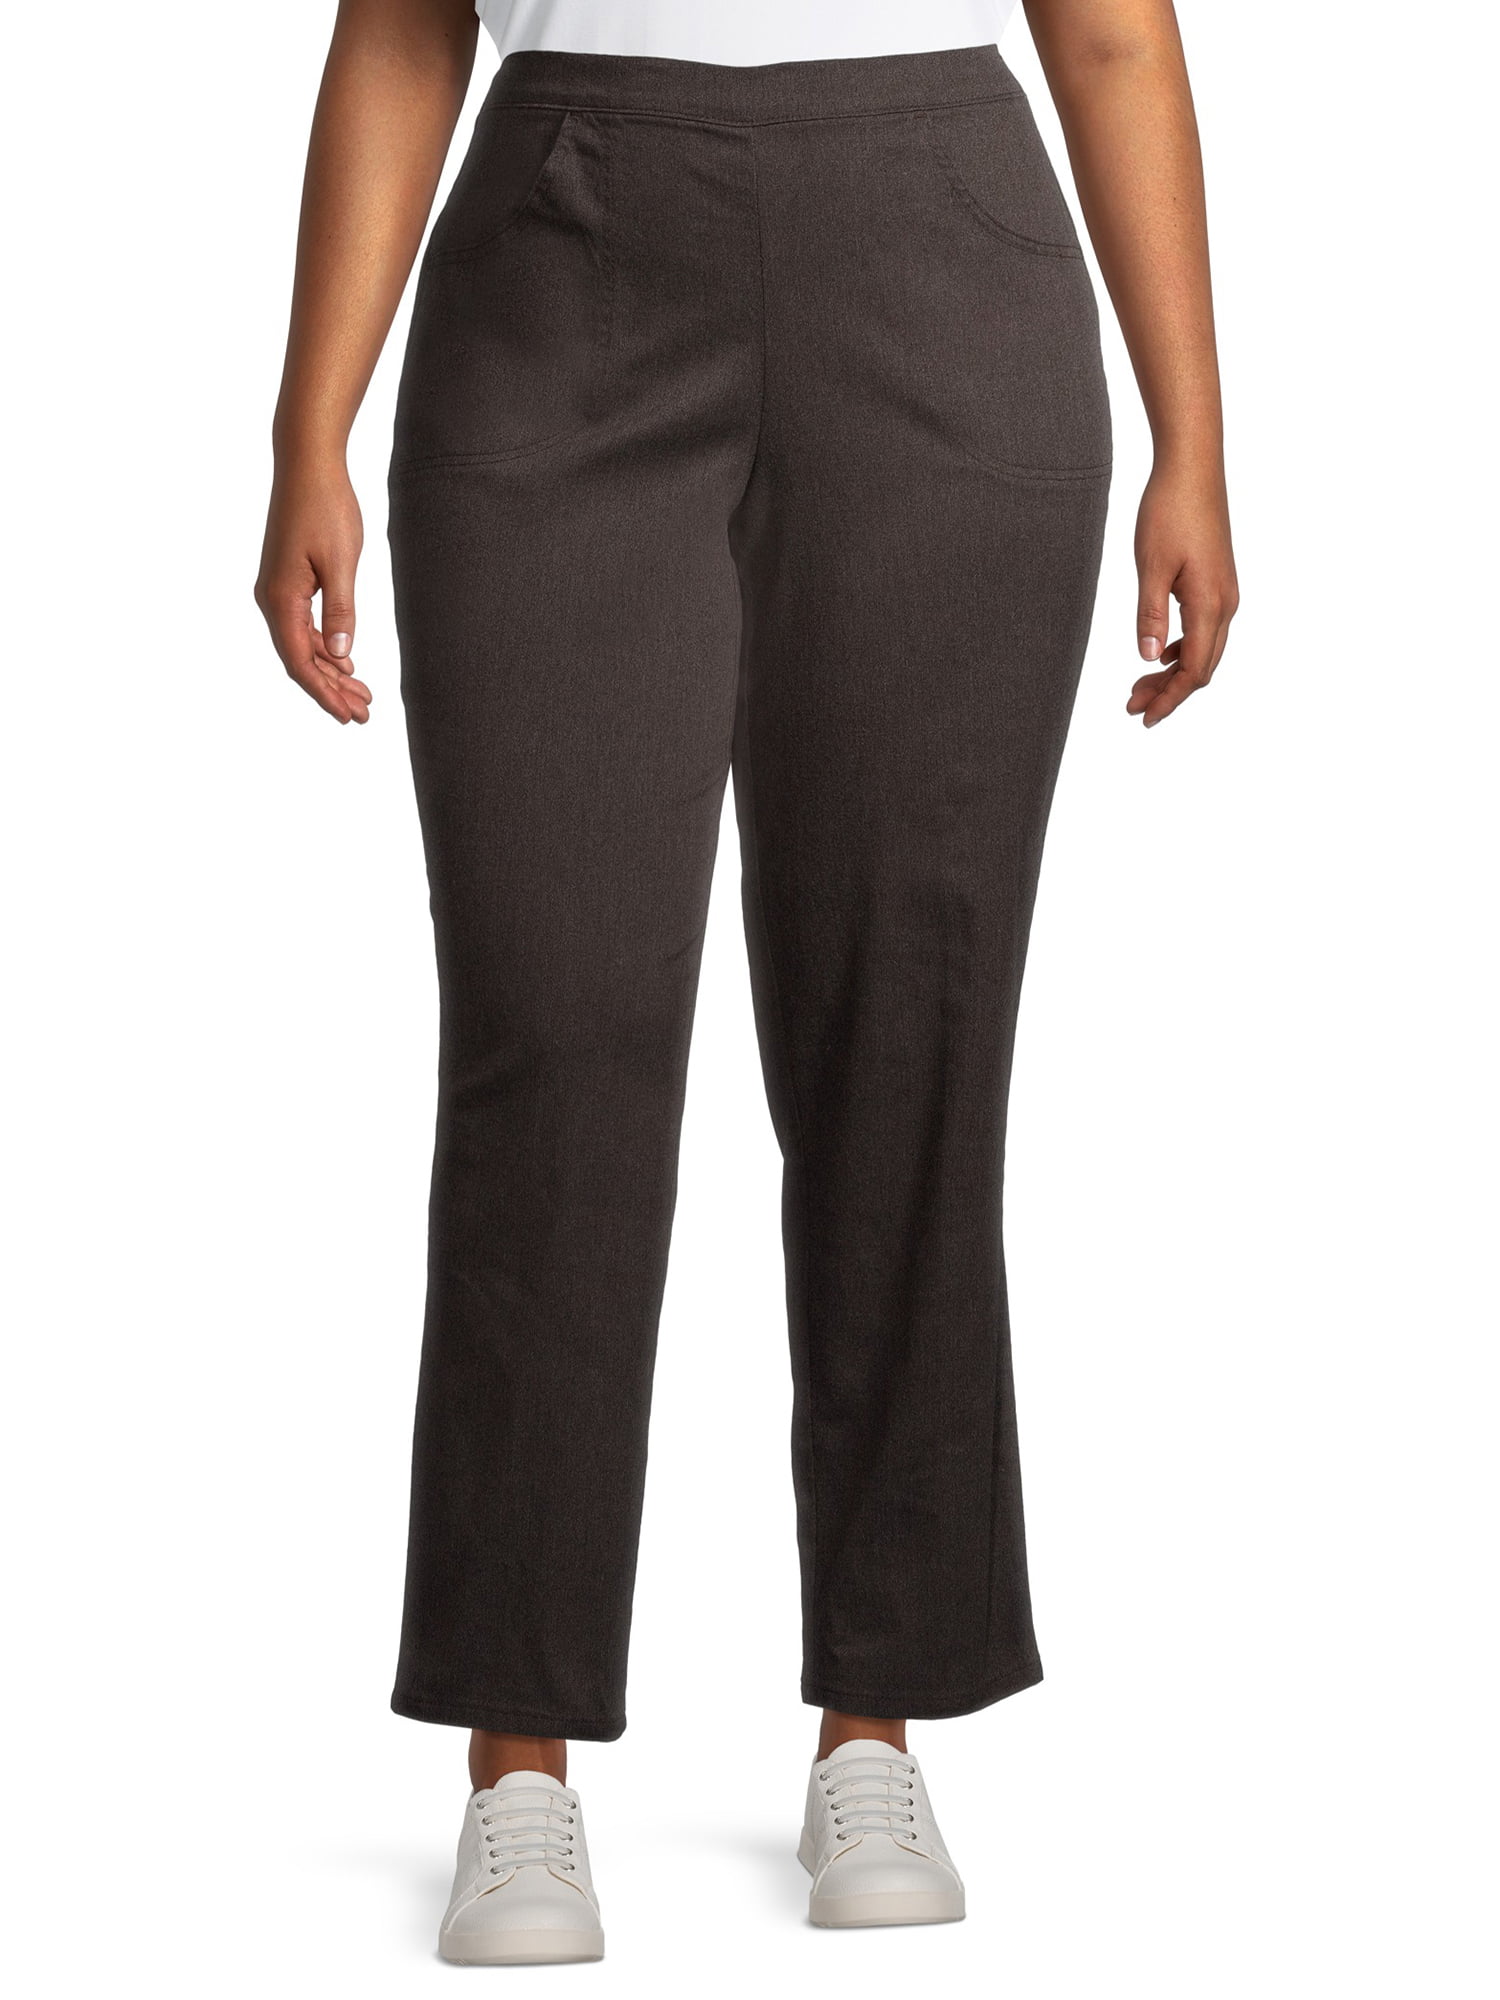 Just My Size Women’s Plus Size Pull-On Stretch Woven Pants, Also in ...